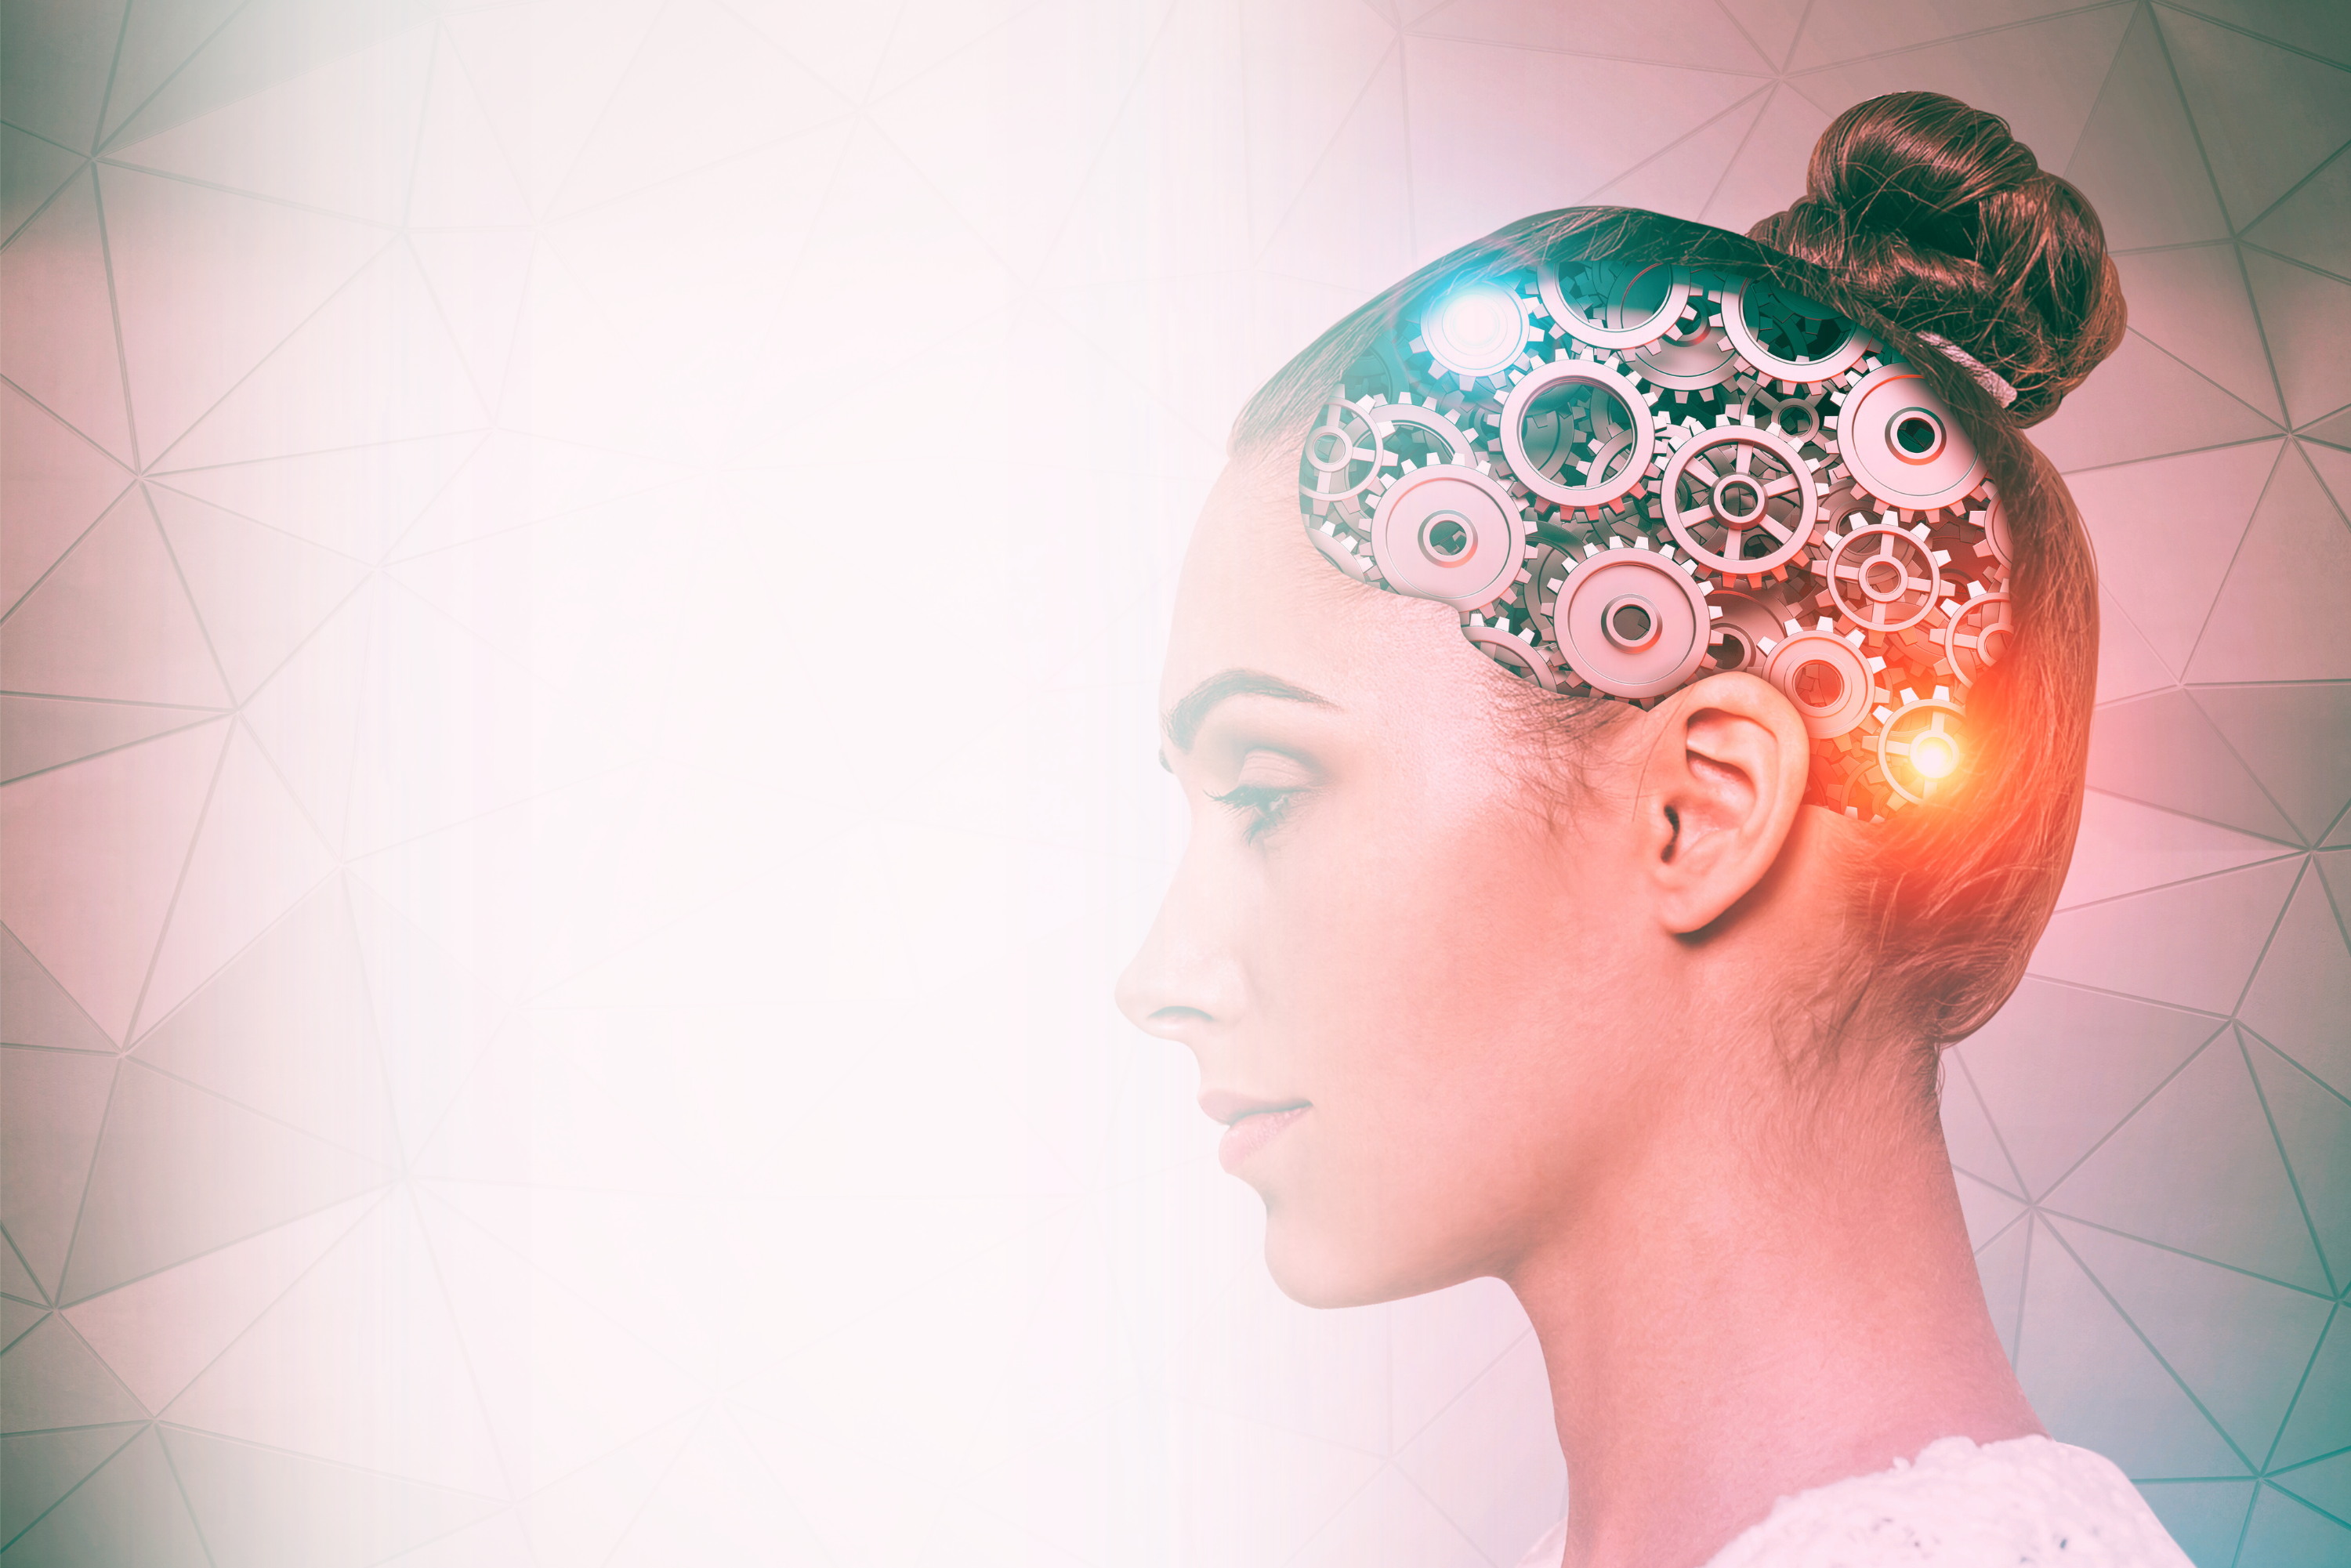 An image of a woman with a vibrant, healthy brain depicted as a transparent silhouette. Within her brain, intricate gears and mechanisms symbolize the optimal functioning of cognitive processes. This visual represents the concept of a well-maintained brain and is featured in a blog post about promoting brain health and cognitive vitality